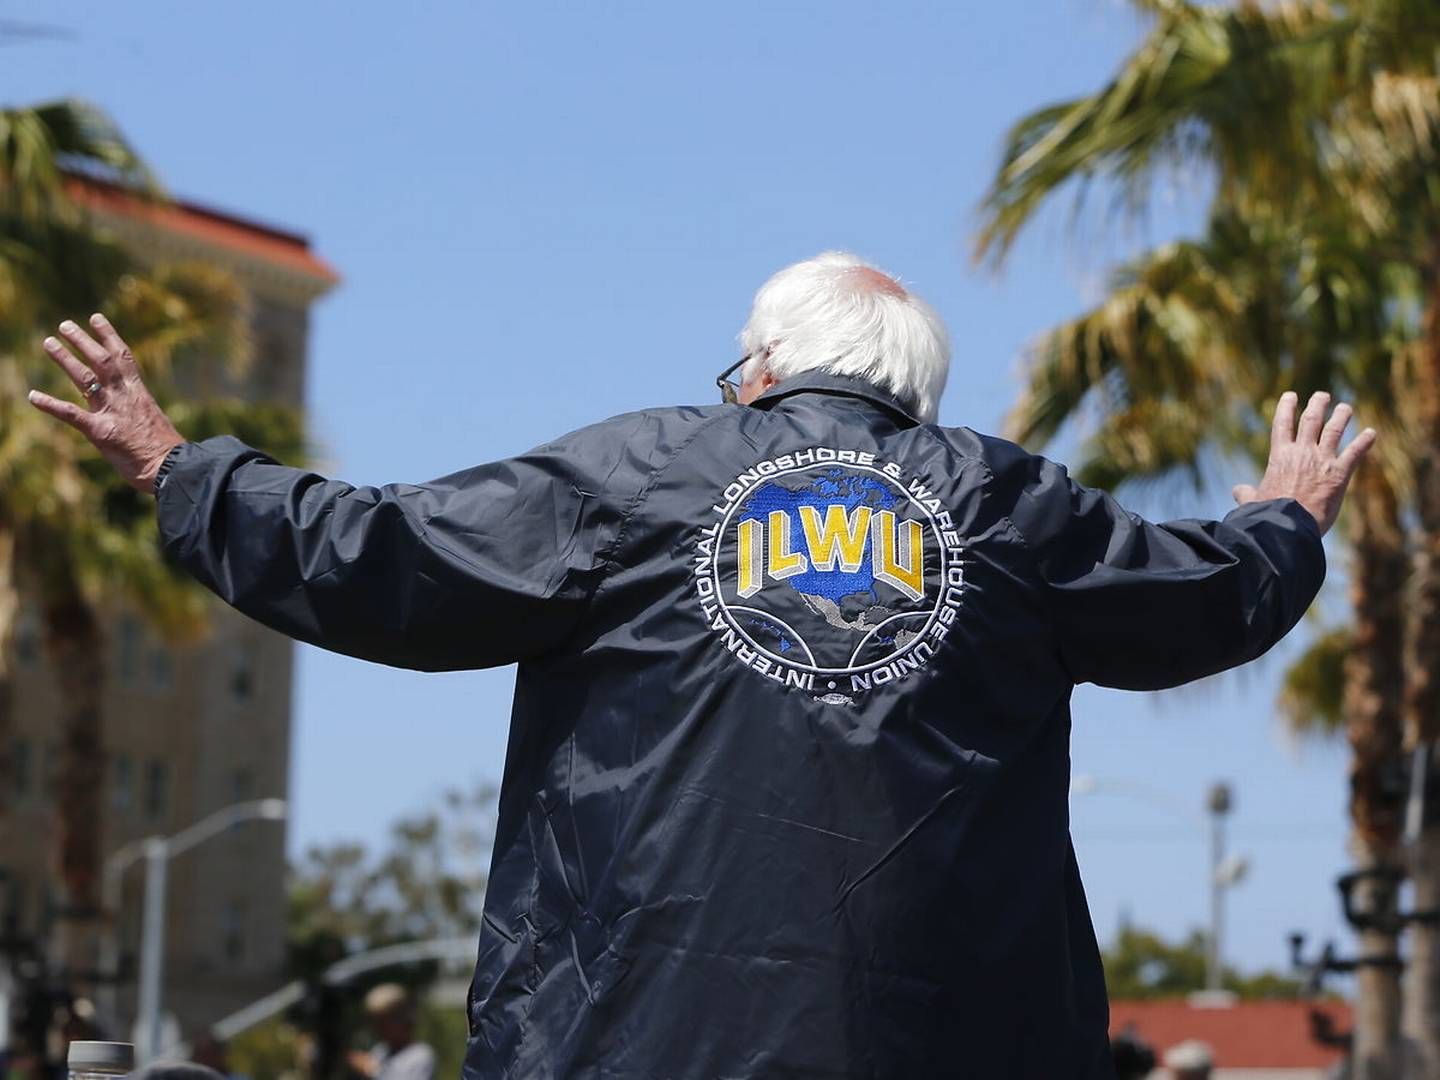 In 2016, former presidential candidate Bernie Sanders was backed by the port workers' labor union ILWU due to his struggle for labor unions and the working class. | Photo: Damian Dovarganes/AP/Ritzau Scanpix